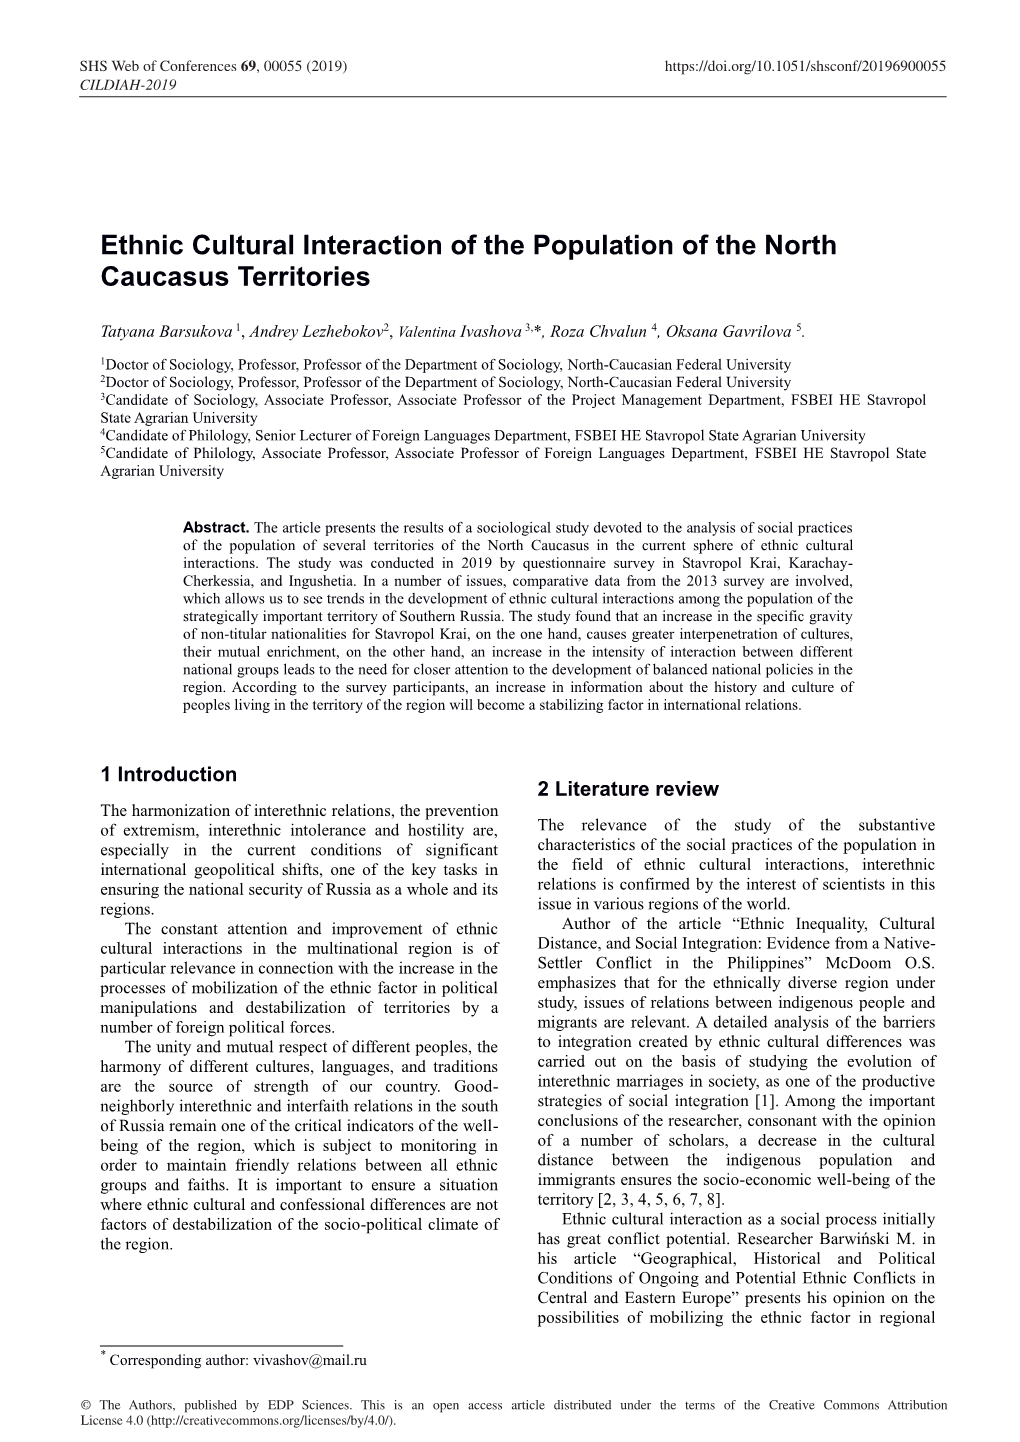 Ethnic Cultural Interaction of the Population of the North Caucasus Territories